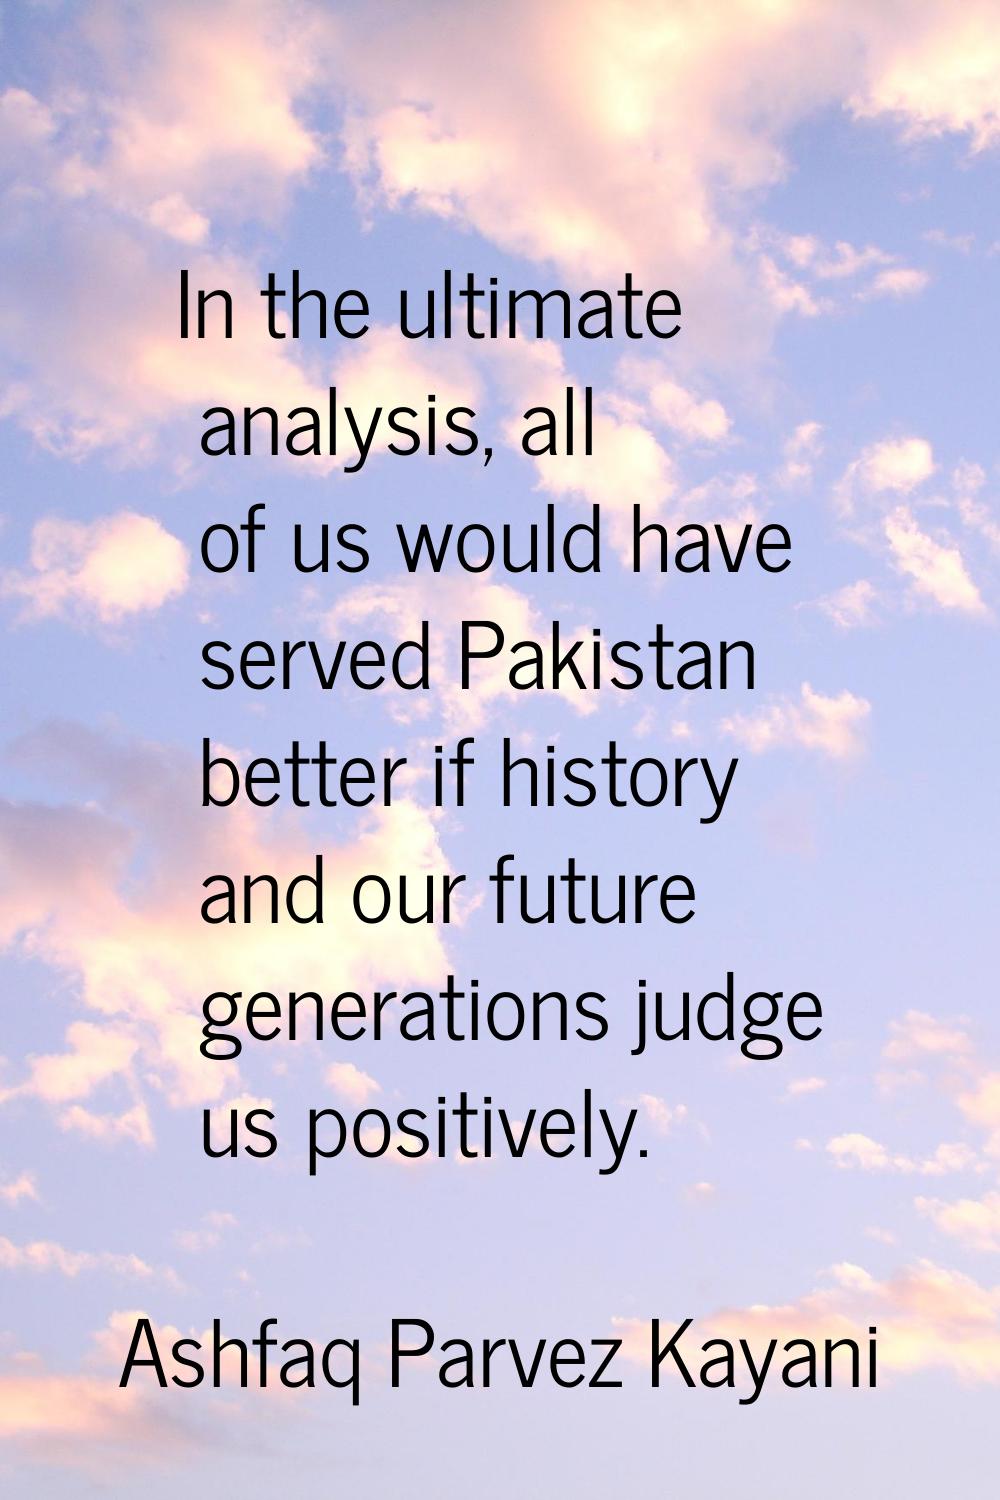 In the ultimate analysis, all of us would have served Pakistan better if history and our future gen